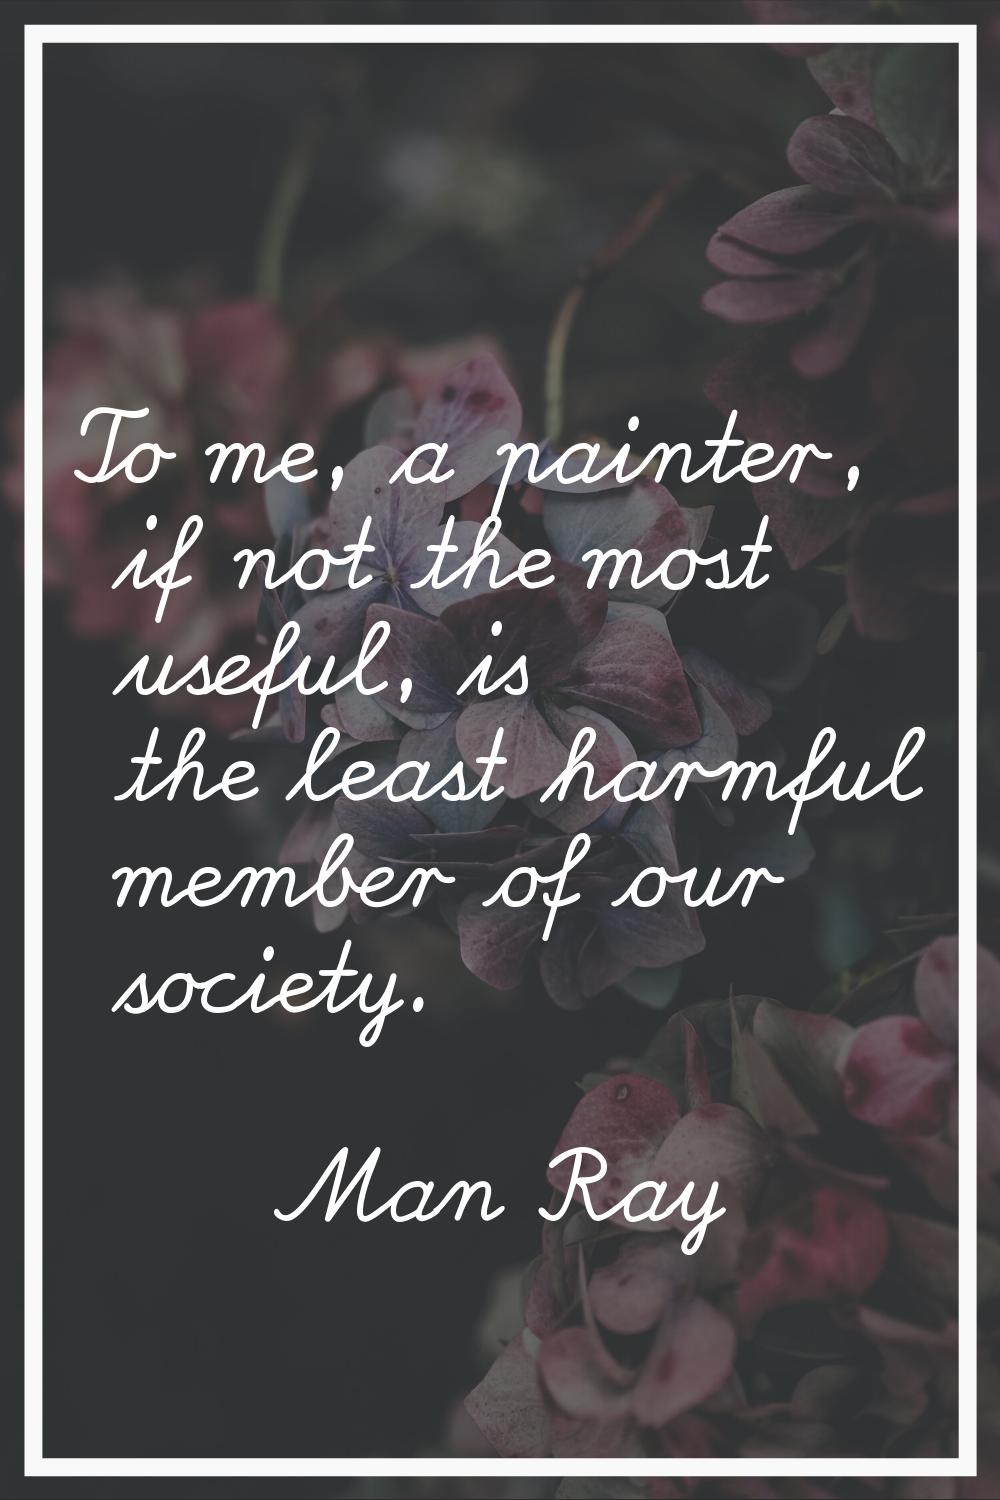 To me, a painter, if not the most useful, is the least harmful member of our society.